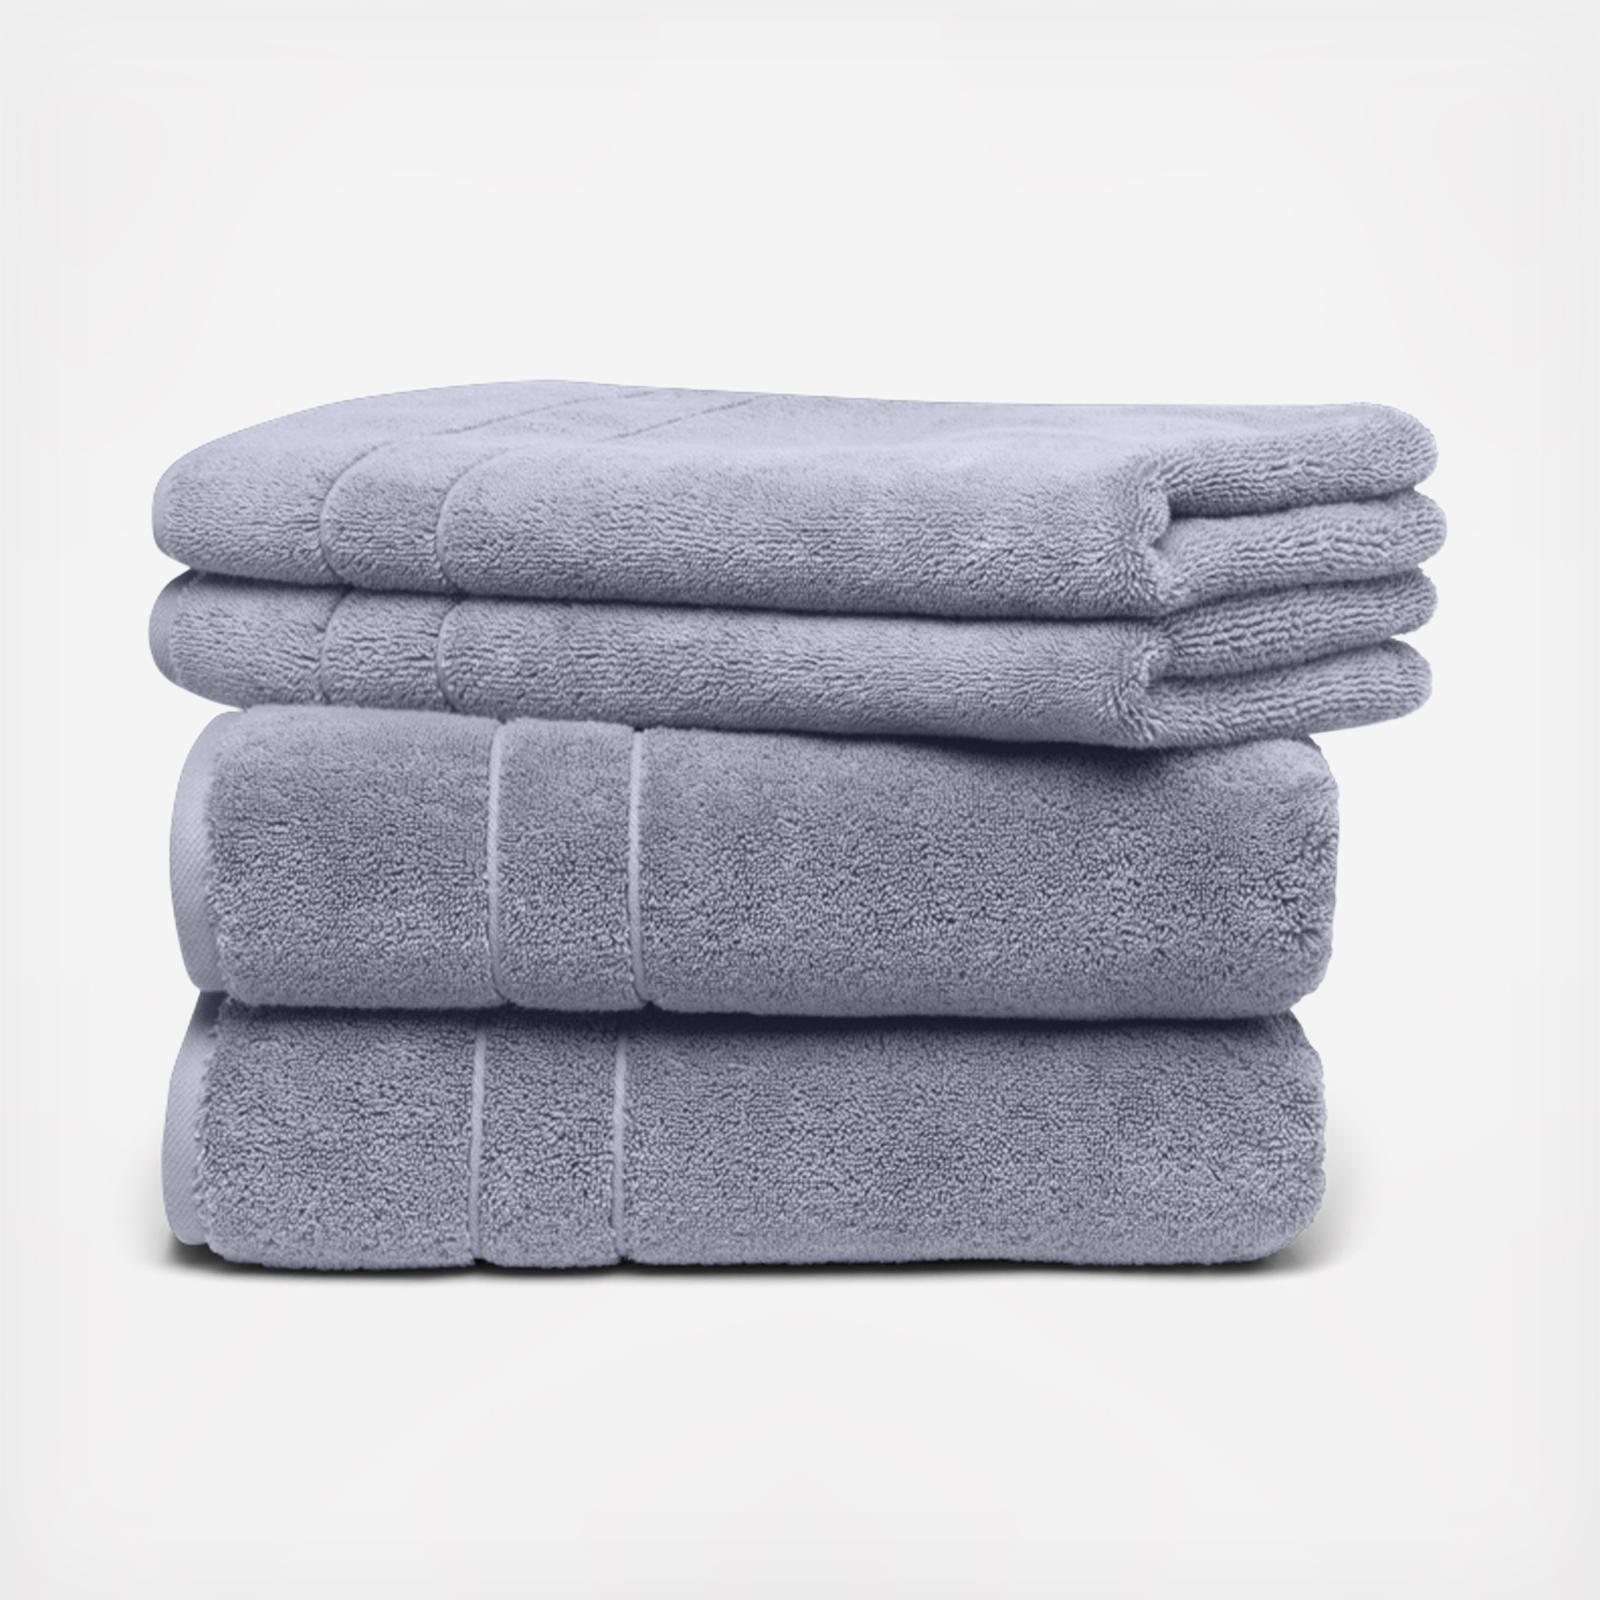 100% Organic Cotton Ribbed Towel Bundle - Bath Towels & Hand Towels in Blue by Brooklinen - Holiday Gift Ideas